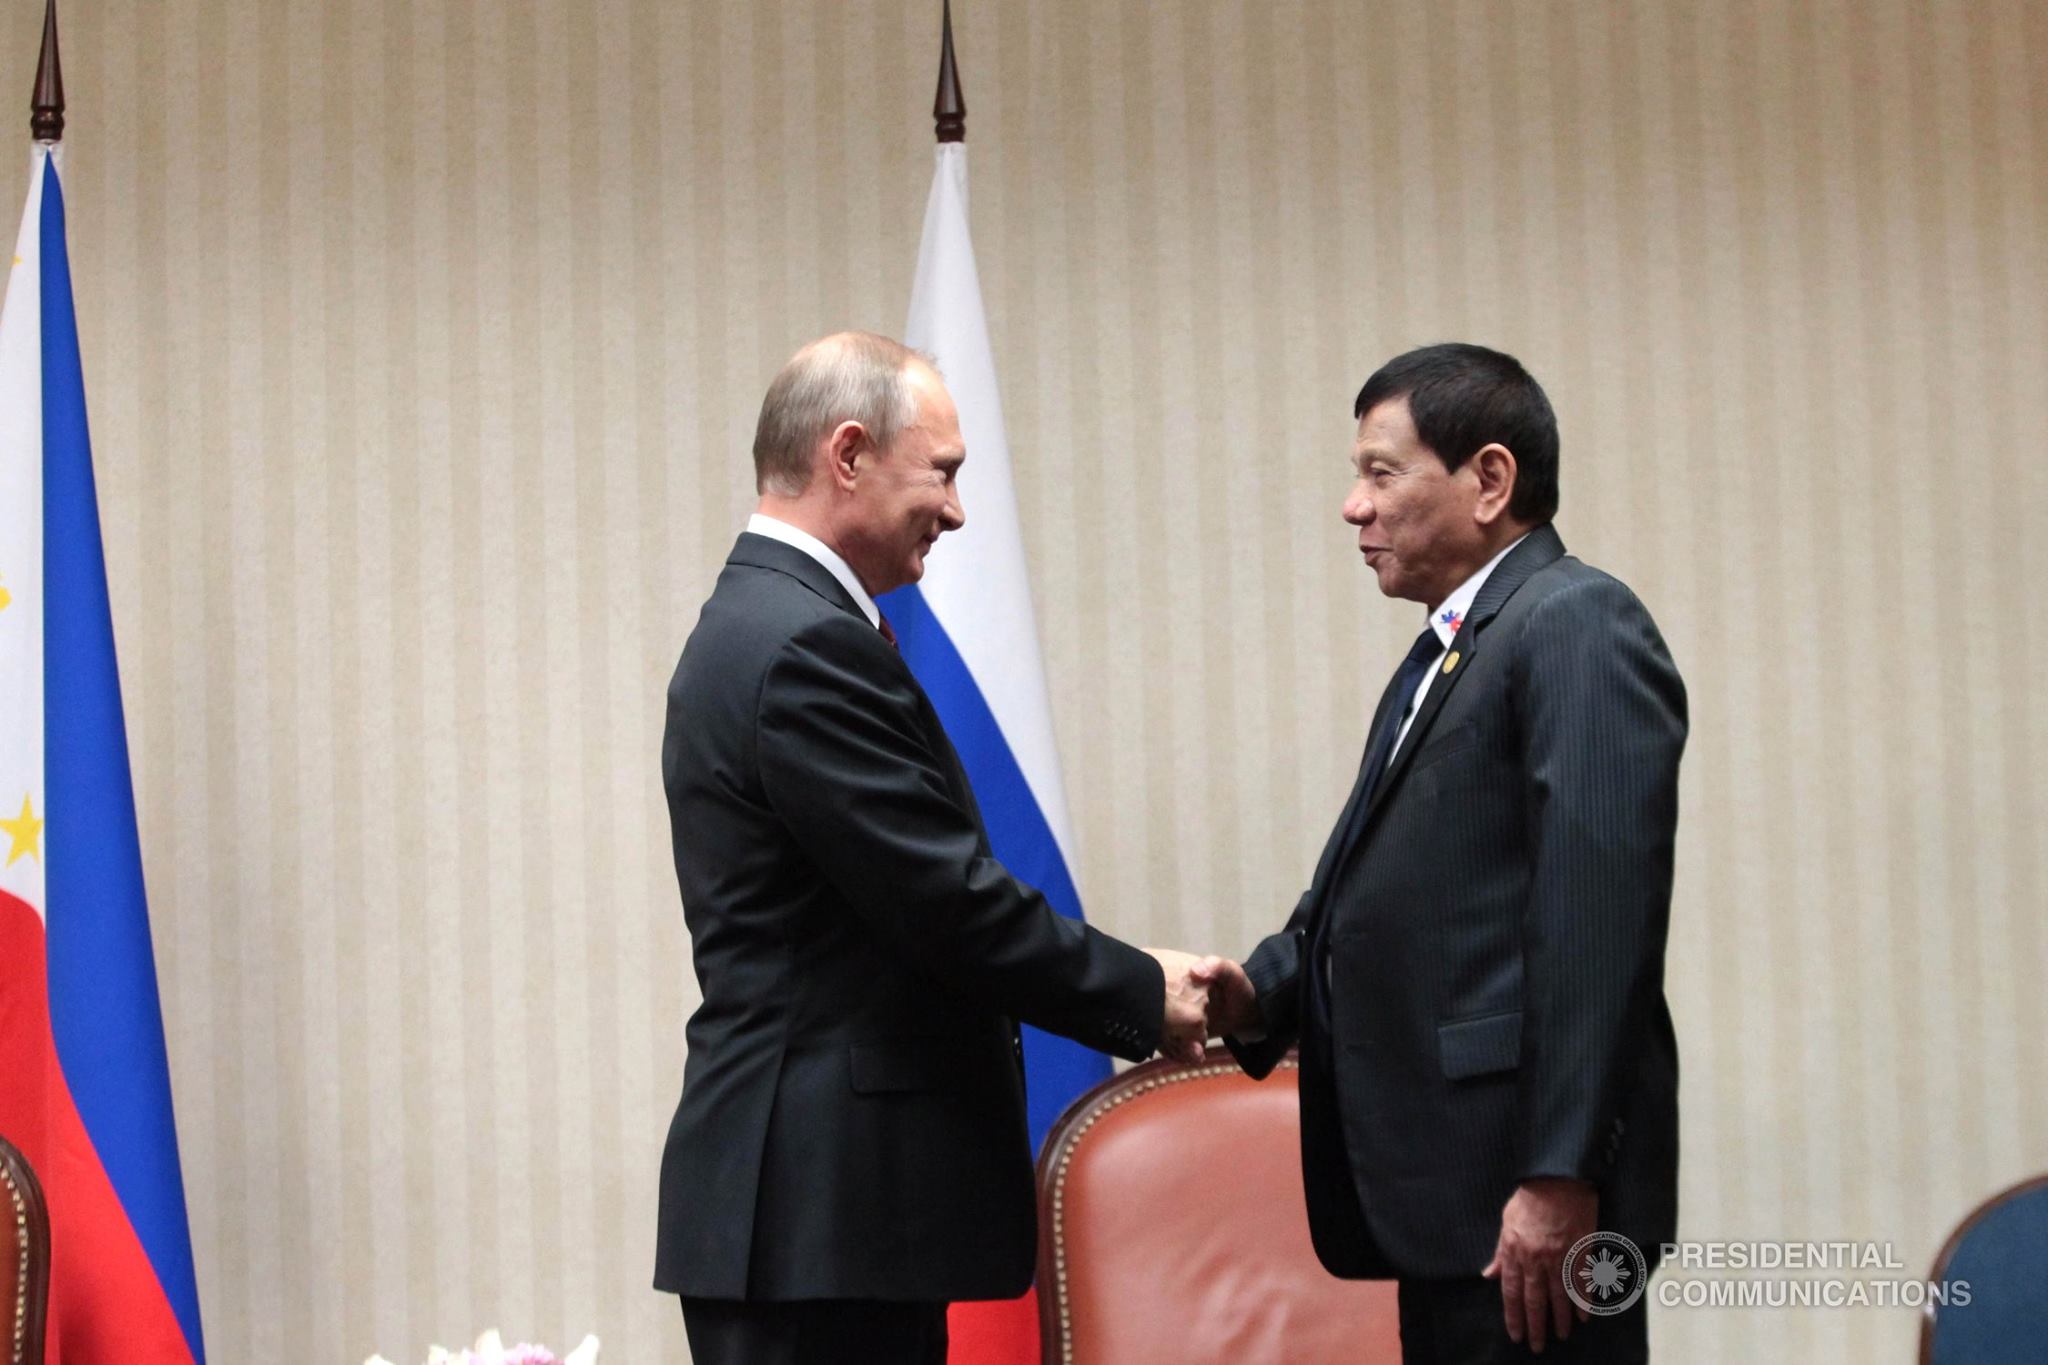 Russian Federation President Vladimir Putin is seen in this photo smiling as he and Philippine President Rodrigo Duterte shake hands during their bilateral meeting at the sidelines of the APEC Leaders' Summit in Lima, Peru. (Presidential Communications photo)